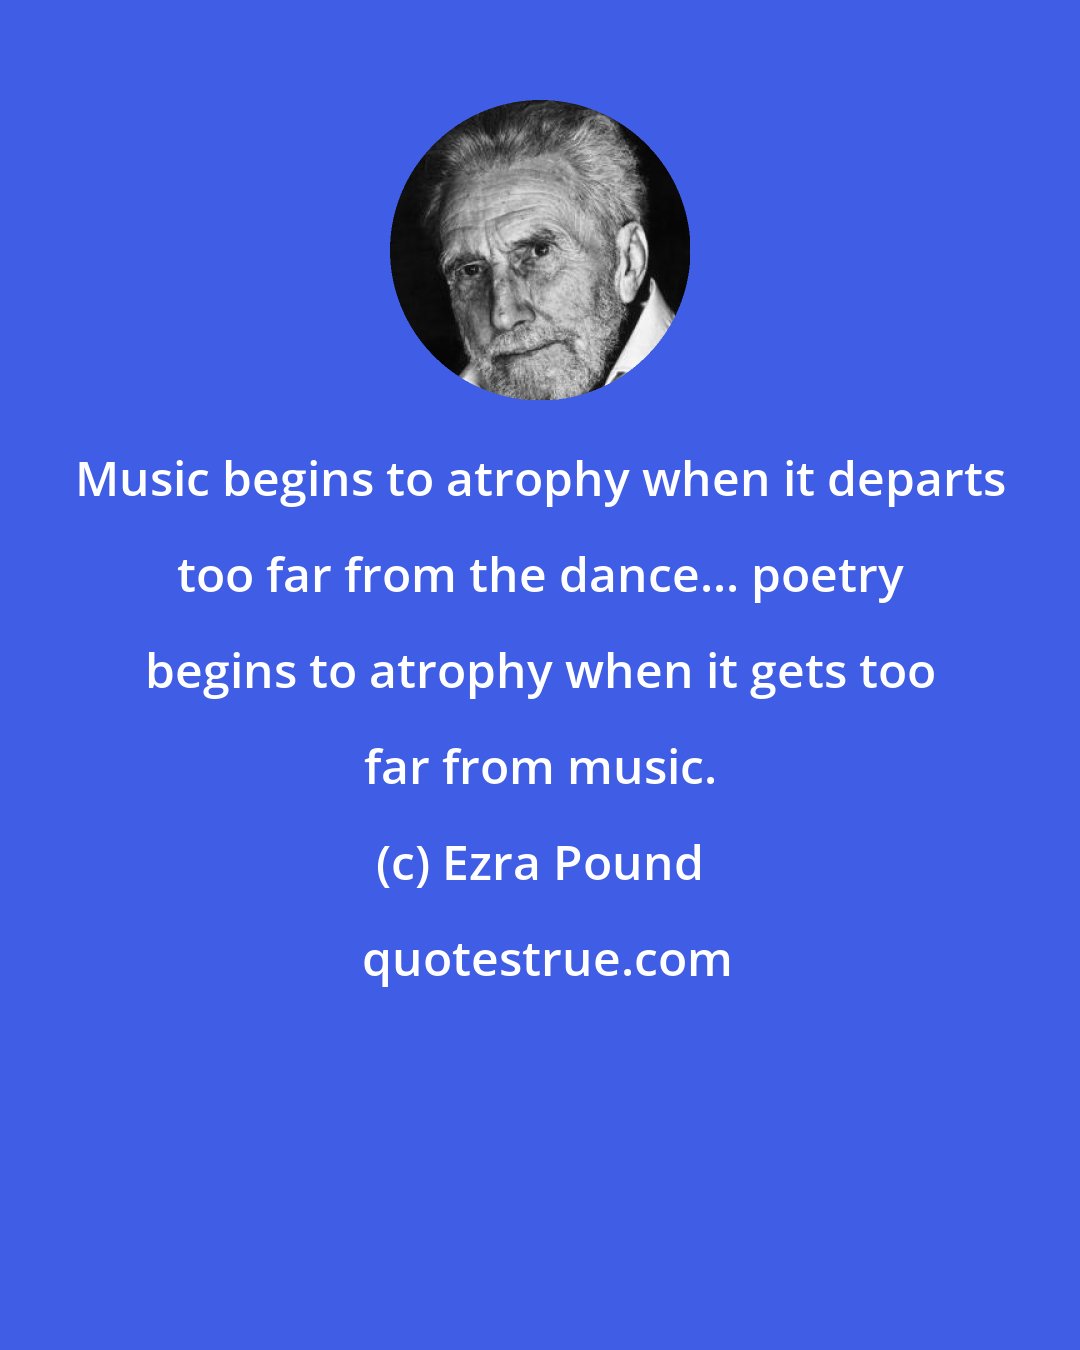 Ezra Pound: Music begins to atrophy when it departs too far from the dance... poetry begins to atrophy when it gets too far from music.